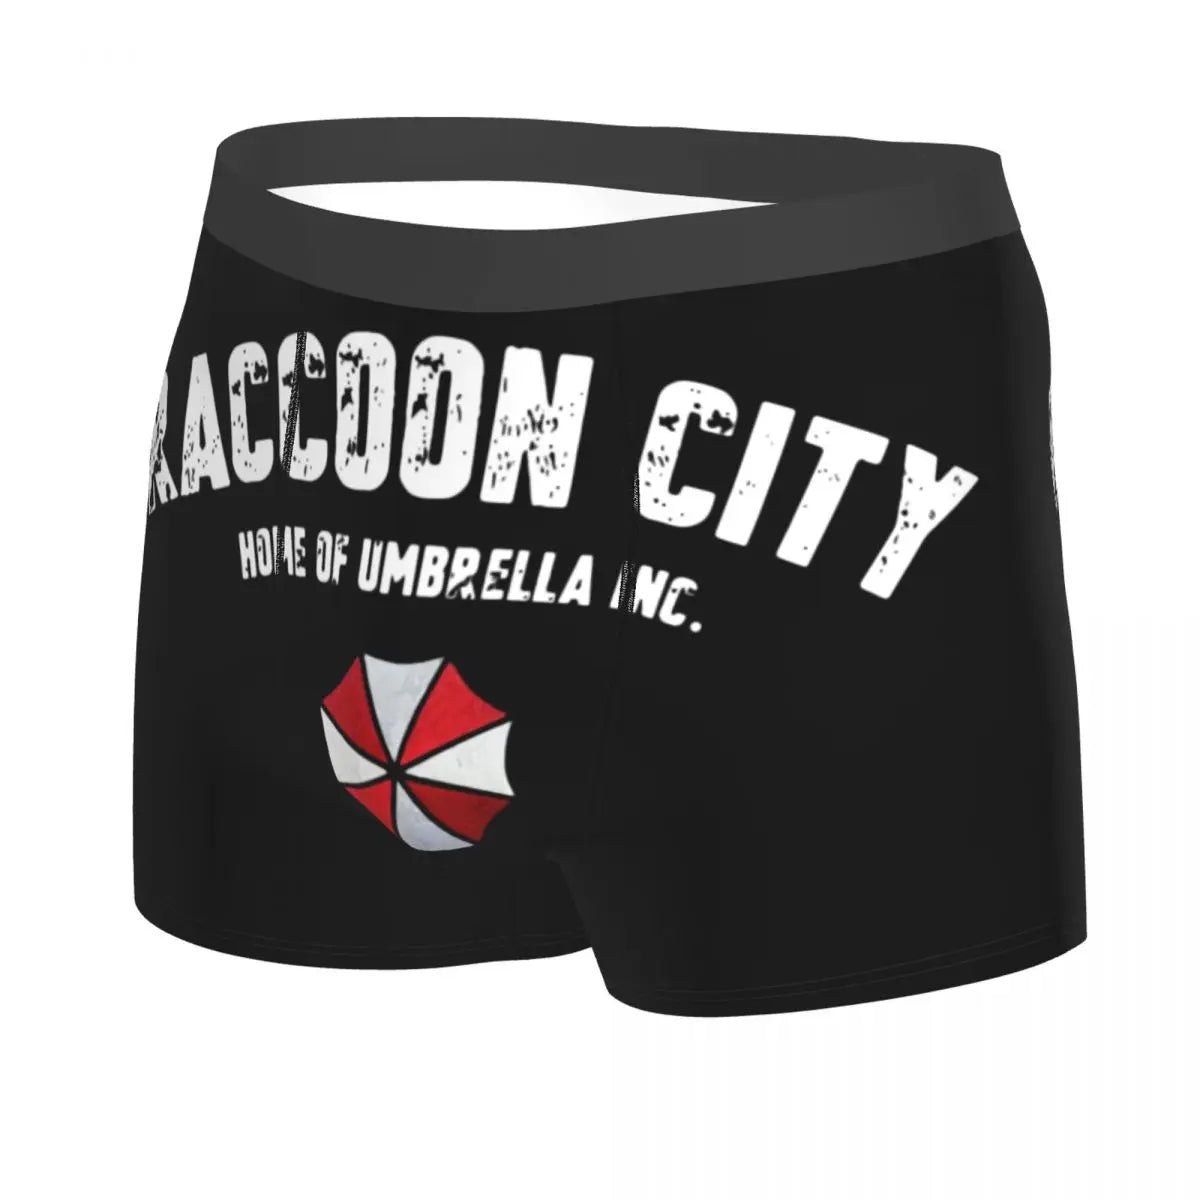 Male Novelty Raccoon City Home Of Umbrella Corporation Corp Underwear Video Game Boxer Briefs Stretch Shorts Panties Underpants